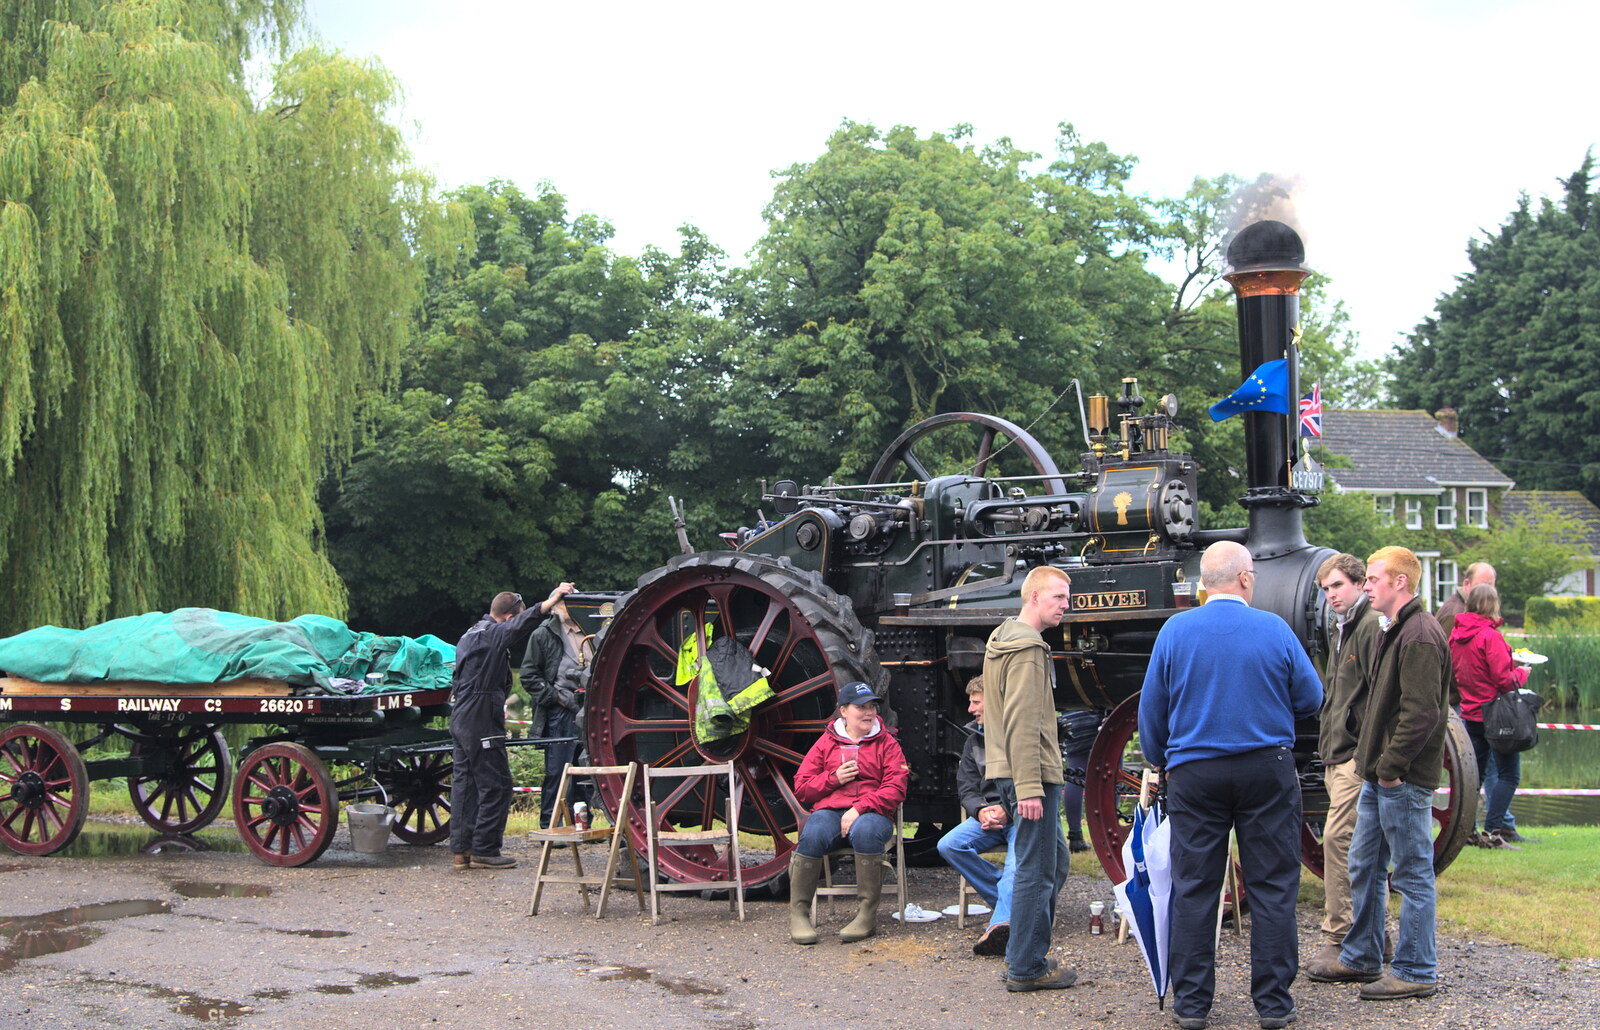 Oliver and a trailer from Thrandeston Pig, Little Green, Thrandeston, Suffolk - 29th June 2014